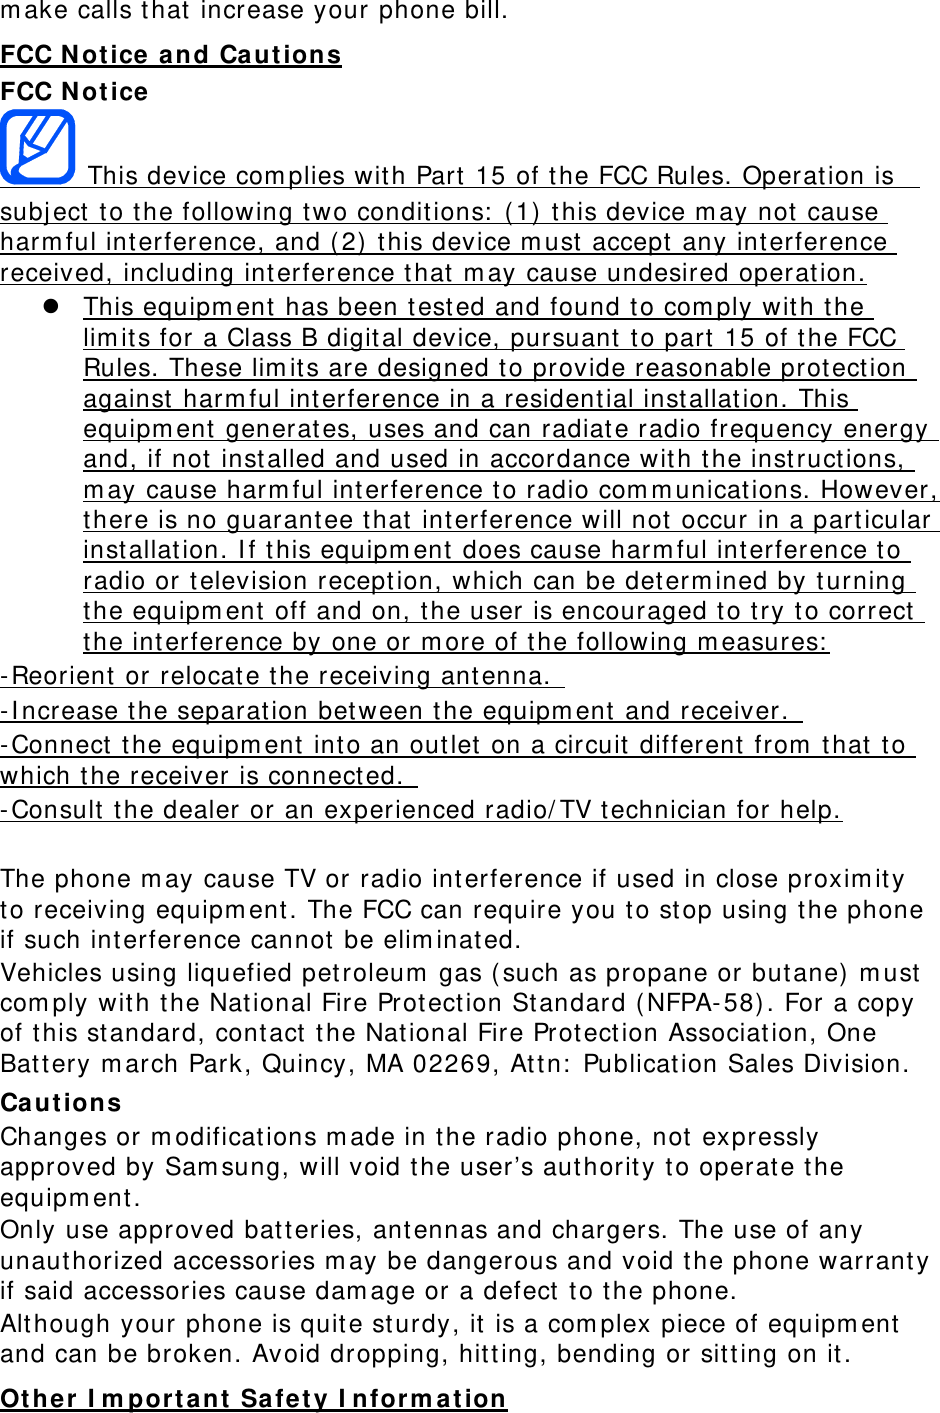 make calls that increase your phone bill. FCC Notice and Cautions FCC Notice  This device complies with Part 15 of the FCC Rules. Operation is  subject to the following two conditions: (1) this device may not cause harmful interference, and (2) this device must accept any interference received, including interference that may cause undesired operation.  This equipment has been tested and found to comply with the limits for a Class B digital device, pursuant to part 15 of the FCC Rules. These limits are designed to provide reasonable protection against harmful interference in a residential installation. This equipment generates, uses and can radiate radio frequency energy and, if not installed and used in accordance with the instructions, may cause harmful interference to radio communications. However, there is no guarantee that interference will not occur in a particular installation. If this equipment does cause harmful interference to radio or television reception, which can be determined by turning the equipment off and on, the user is encouraged to try to correct the interference by one or more of the following measures: -Reorient or relocate the receiving antenna.  -Increase the separation between the equipment and receiver.  -Connect the equipment into an outlet on a circuit different from that to which the receiver is connected.  -Consult the dealer or an experienced radio/TV technician for help.  The phone may cause TV or radio interference if used in close proximity to receiving equipment. The FCC can require you to stop using the phone if such interference cannot be eliminated. Vehicles using liquefied petroleum gas (such as propane or butane) must comply with the National Fire Protection Standard (NFPA-58). For a copy of this standard, contact the National Fire Protection Association, One Battery march Park, Quincy, MA 02269, Attn: Publication Sales Division. Cautions Changes or modifications made in the radio phone, not expressly approved by Samsung, will void the user’s authority to operate the equipment. Only use approved batteries, antennas and chargers. The use of any unauthorized accessories may be dangerous and void the phone warranty if said accessories cause damage or a defect to the phone. Although your phone is quite sturdy, it is a complex piece of equipment and can be broken. Avoid dropping, hitting, bending or sitting on it. Other Important Safety Information 